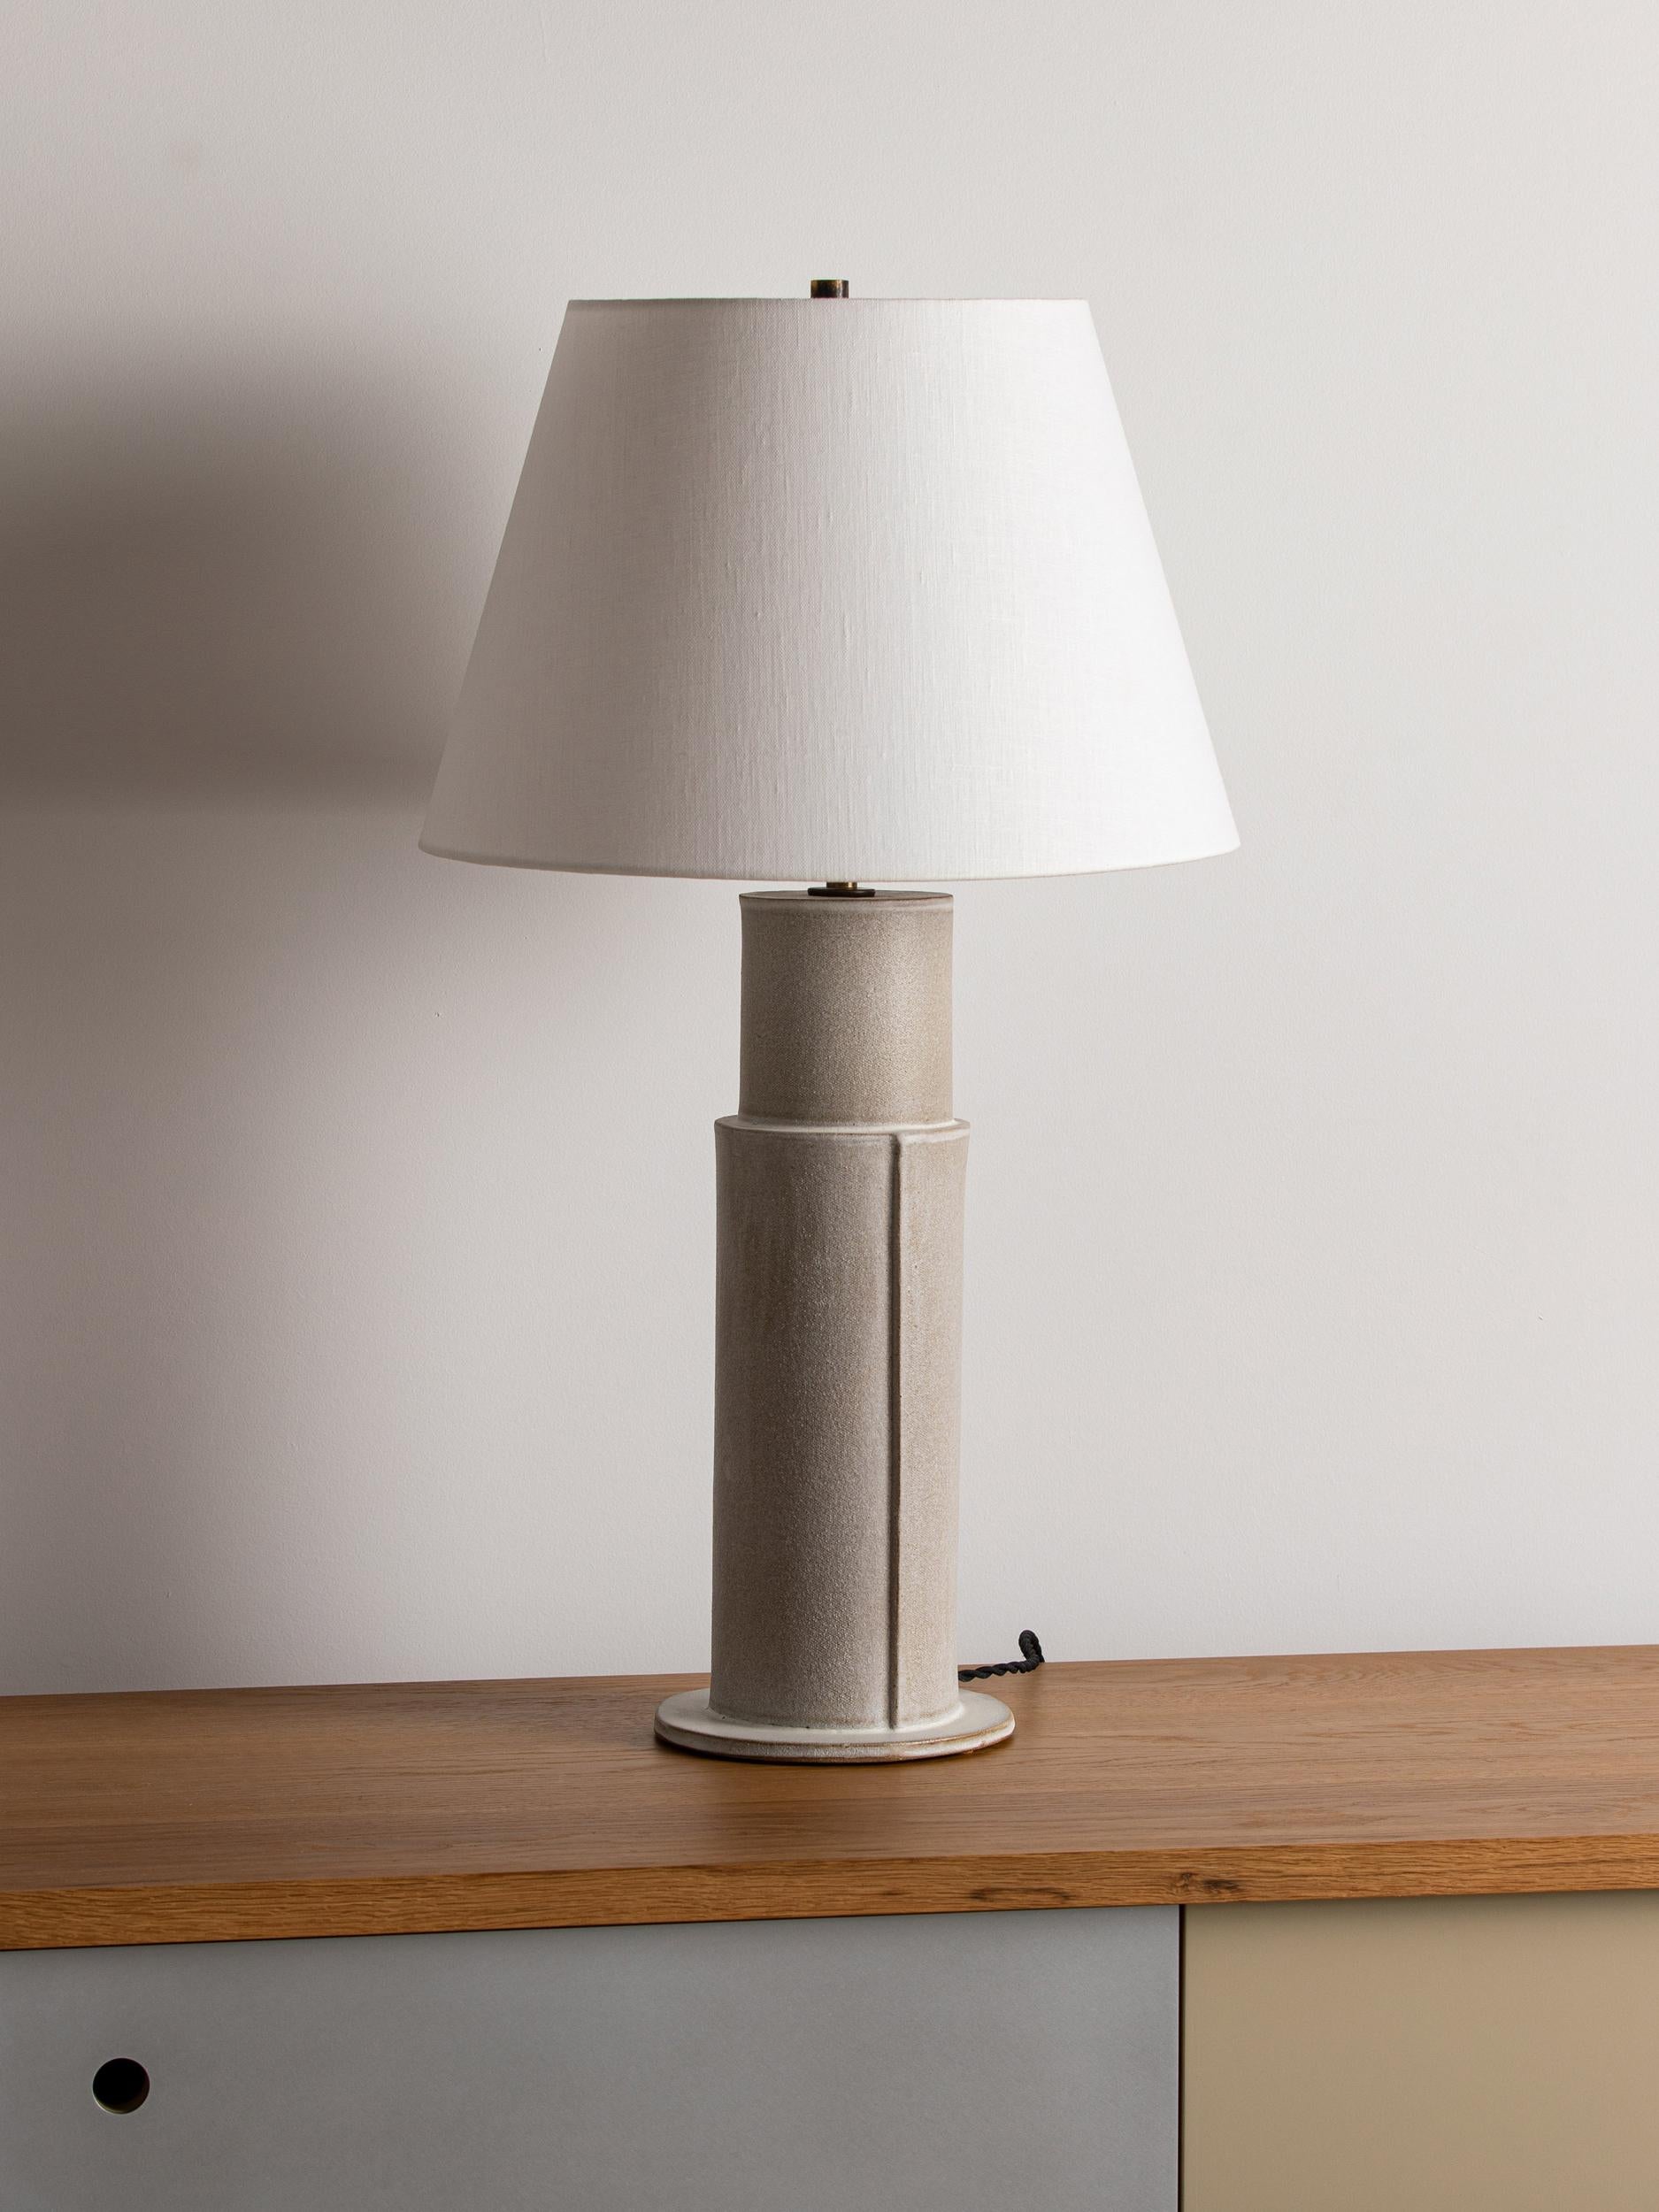 Our stoneware Madeline Lamp is handcrafted using slab-construction techniques.

Finish
- Dipped or poured glaze, pictured in ochre dipped
- Antique brass fittings
- Twisted black-cloth cord, Full-range dimmer socket
- Paper shade

BULB

75-watt